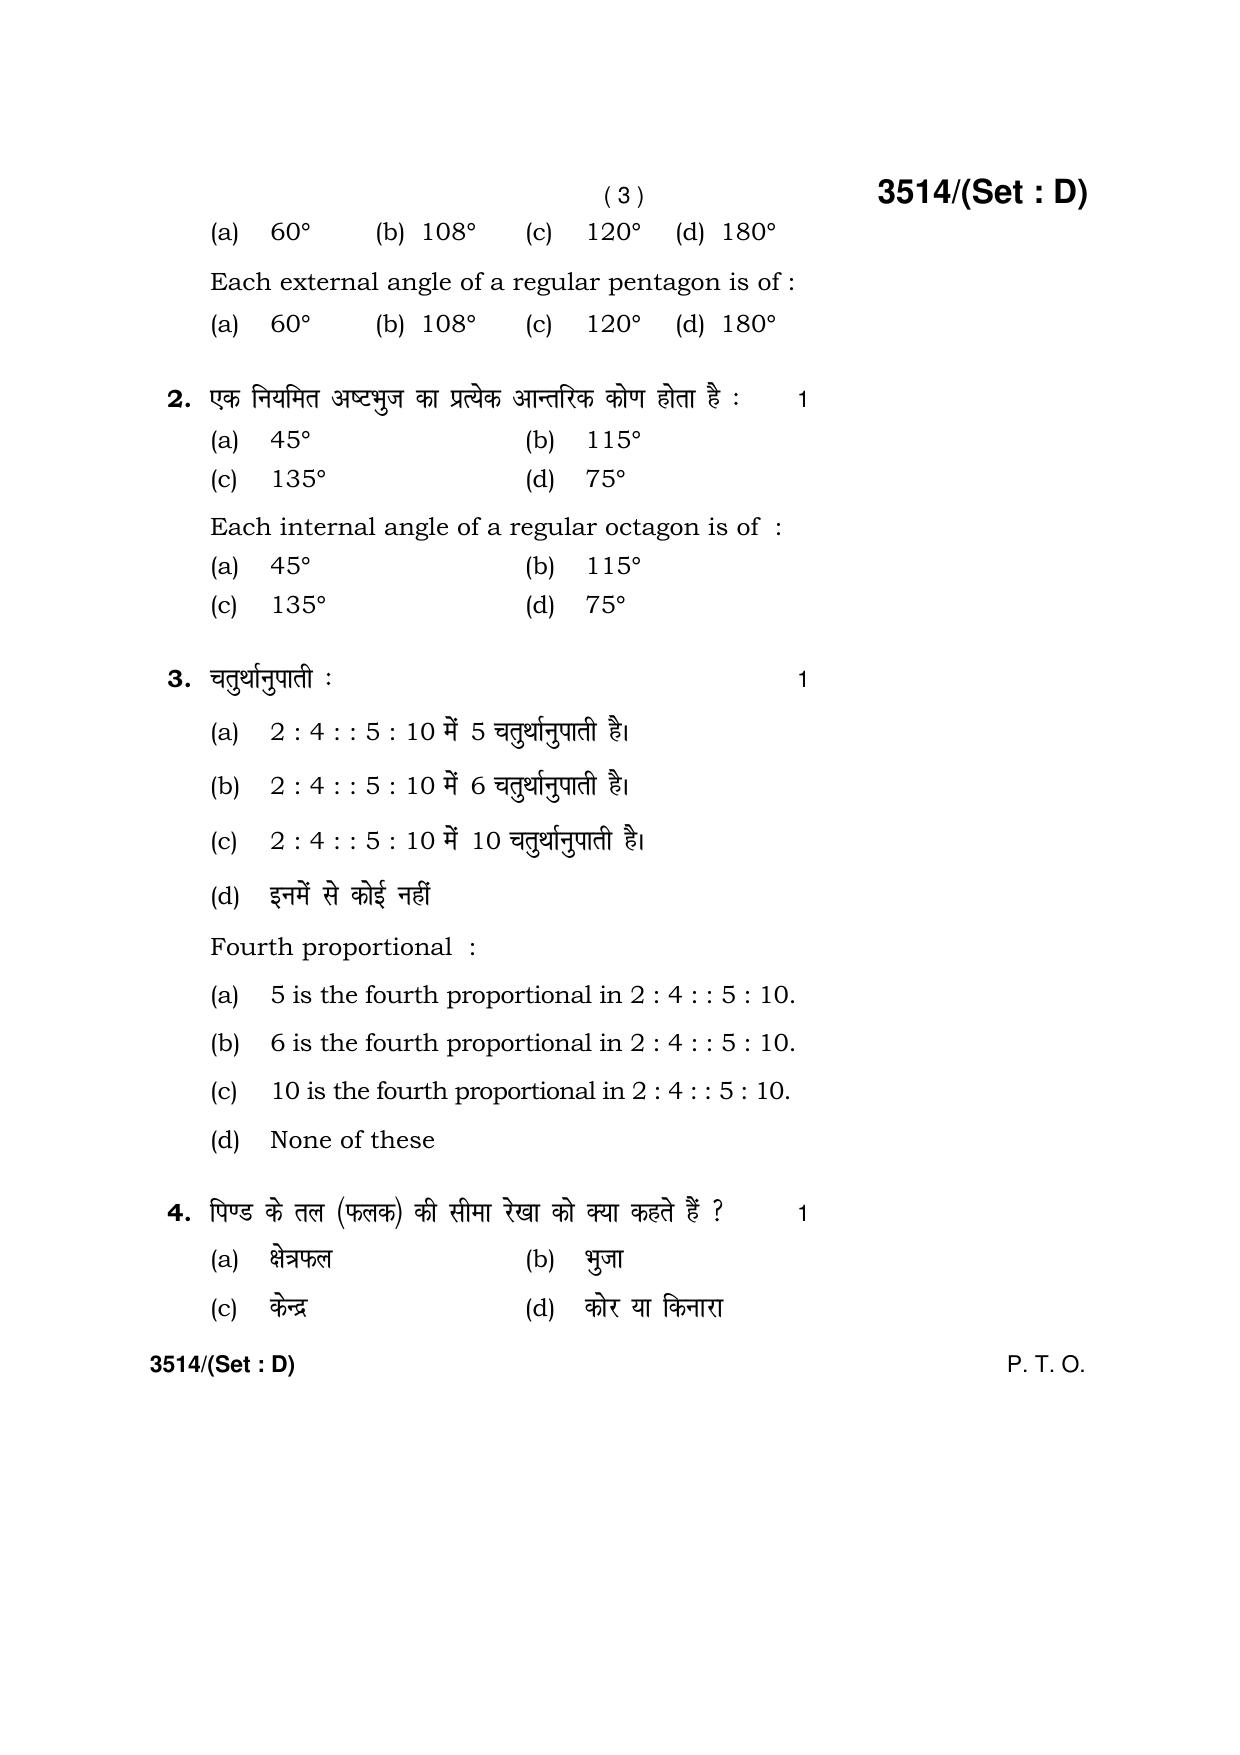 Haryana Board HBSE Class 10 Drawing -D 2018 Question Paper - Page 3